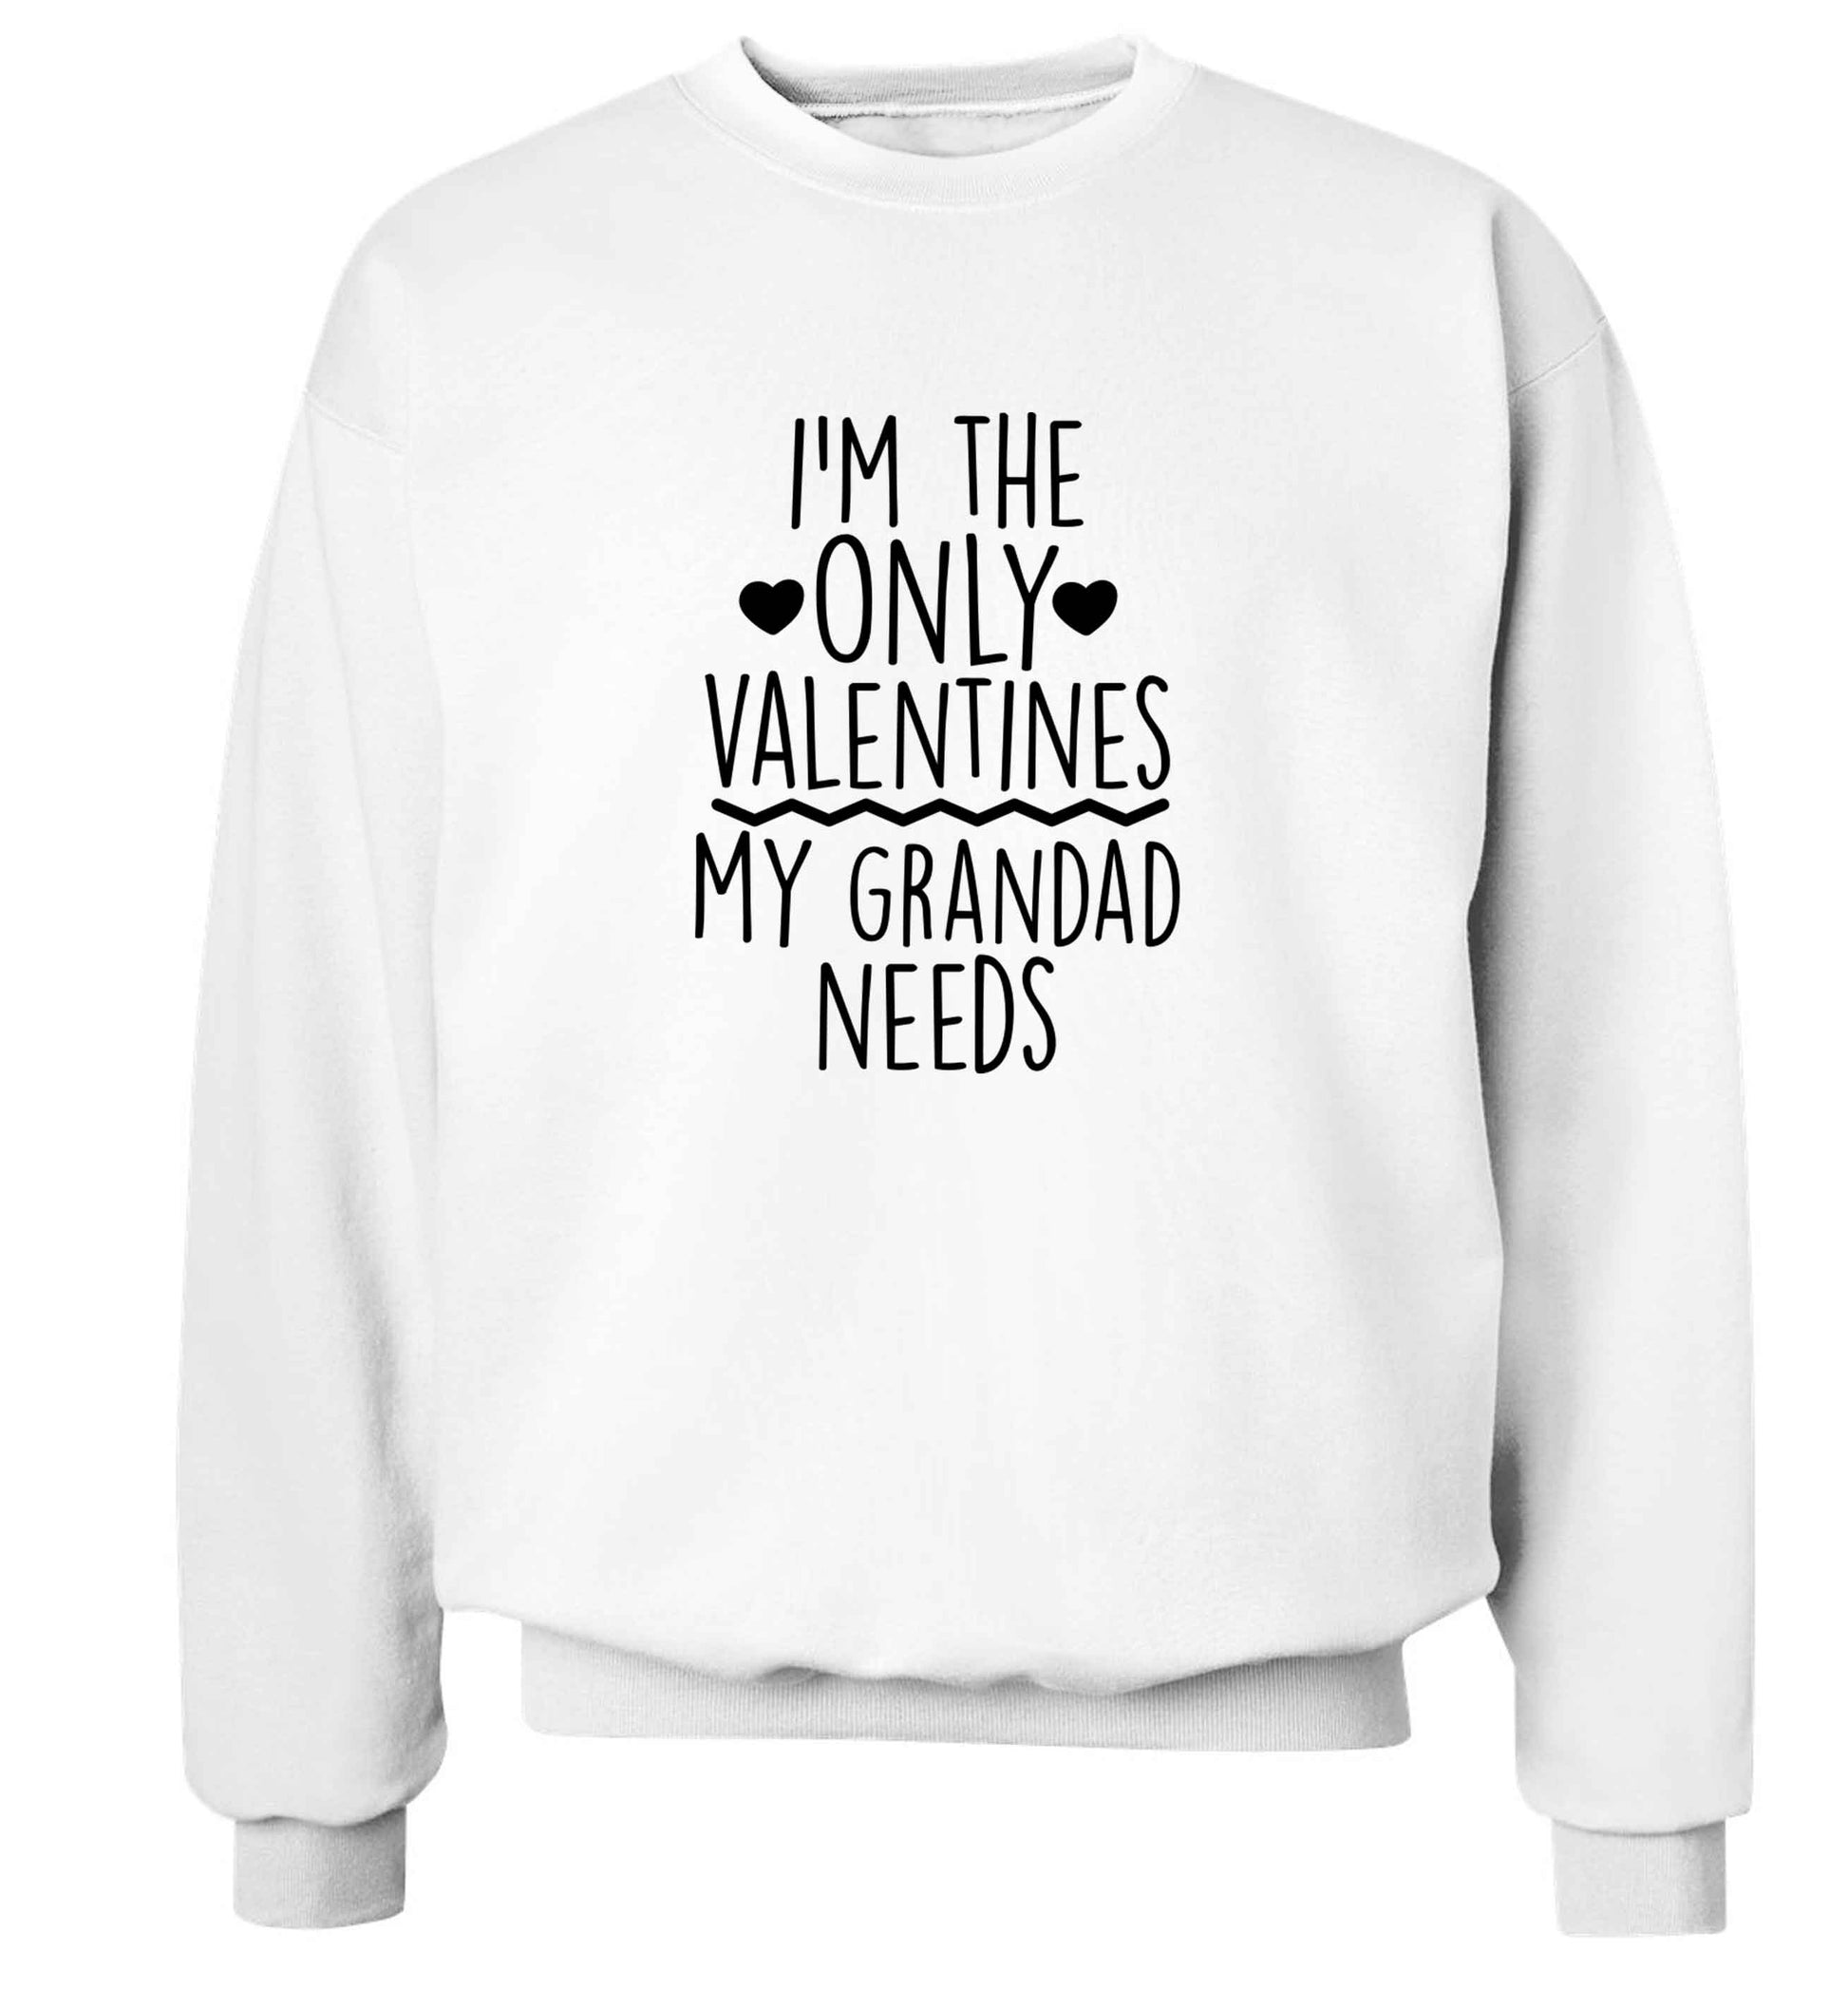 I'm the only valentines my grandad needs adult's unisex white sweater 2XL